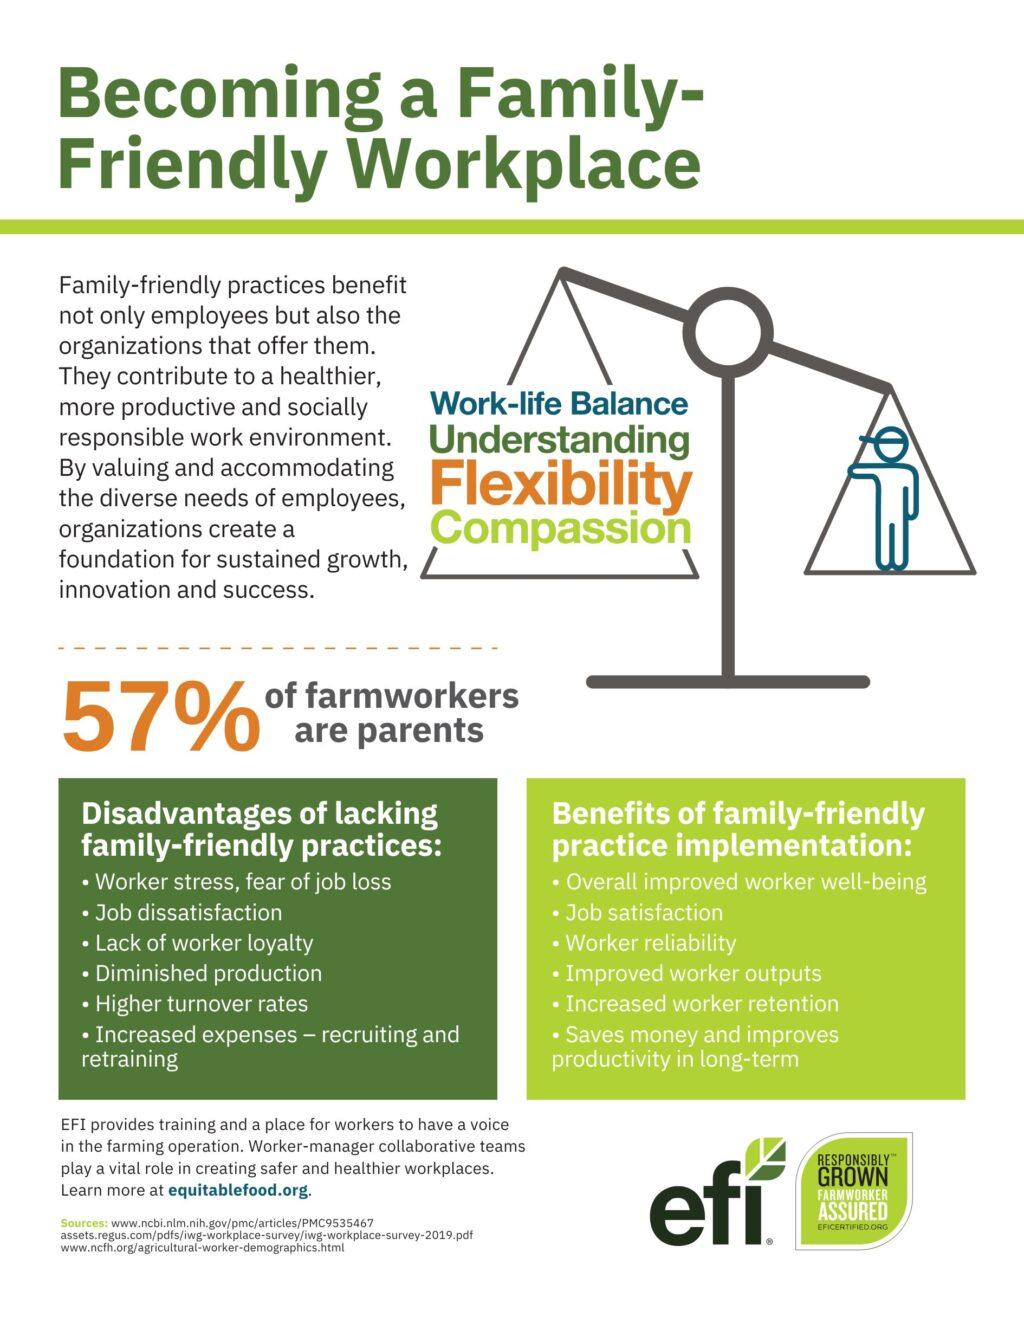 infographic with information and data about family friendly companies. Green boxes with information about family friendly topics